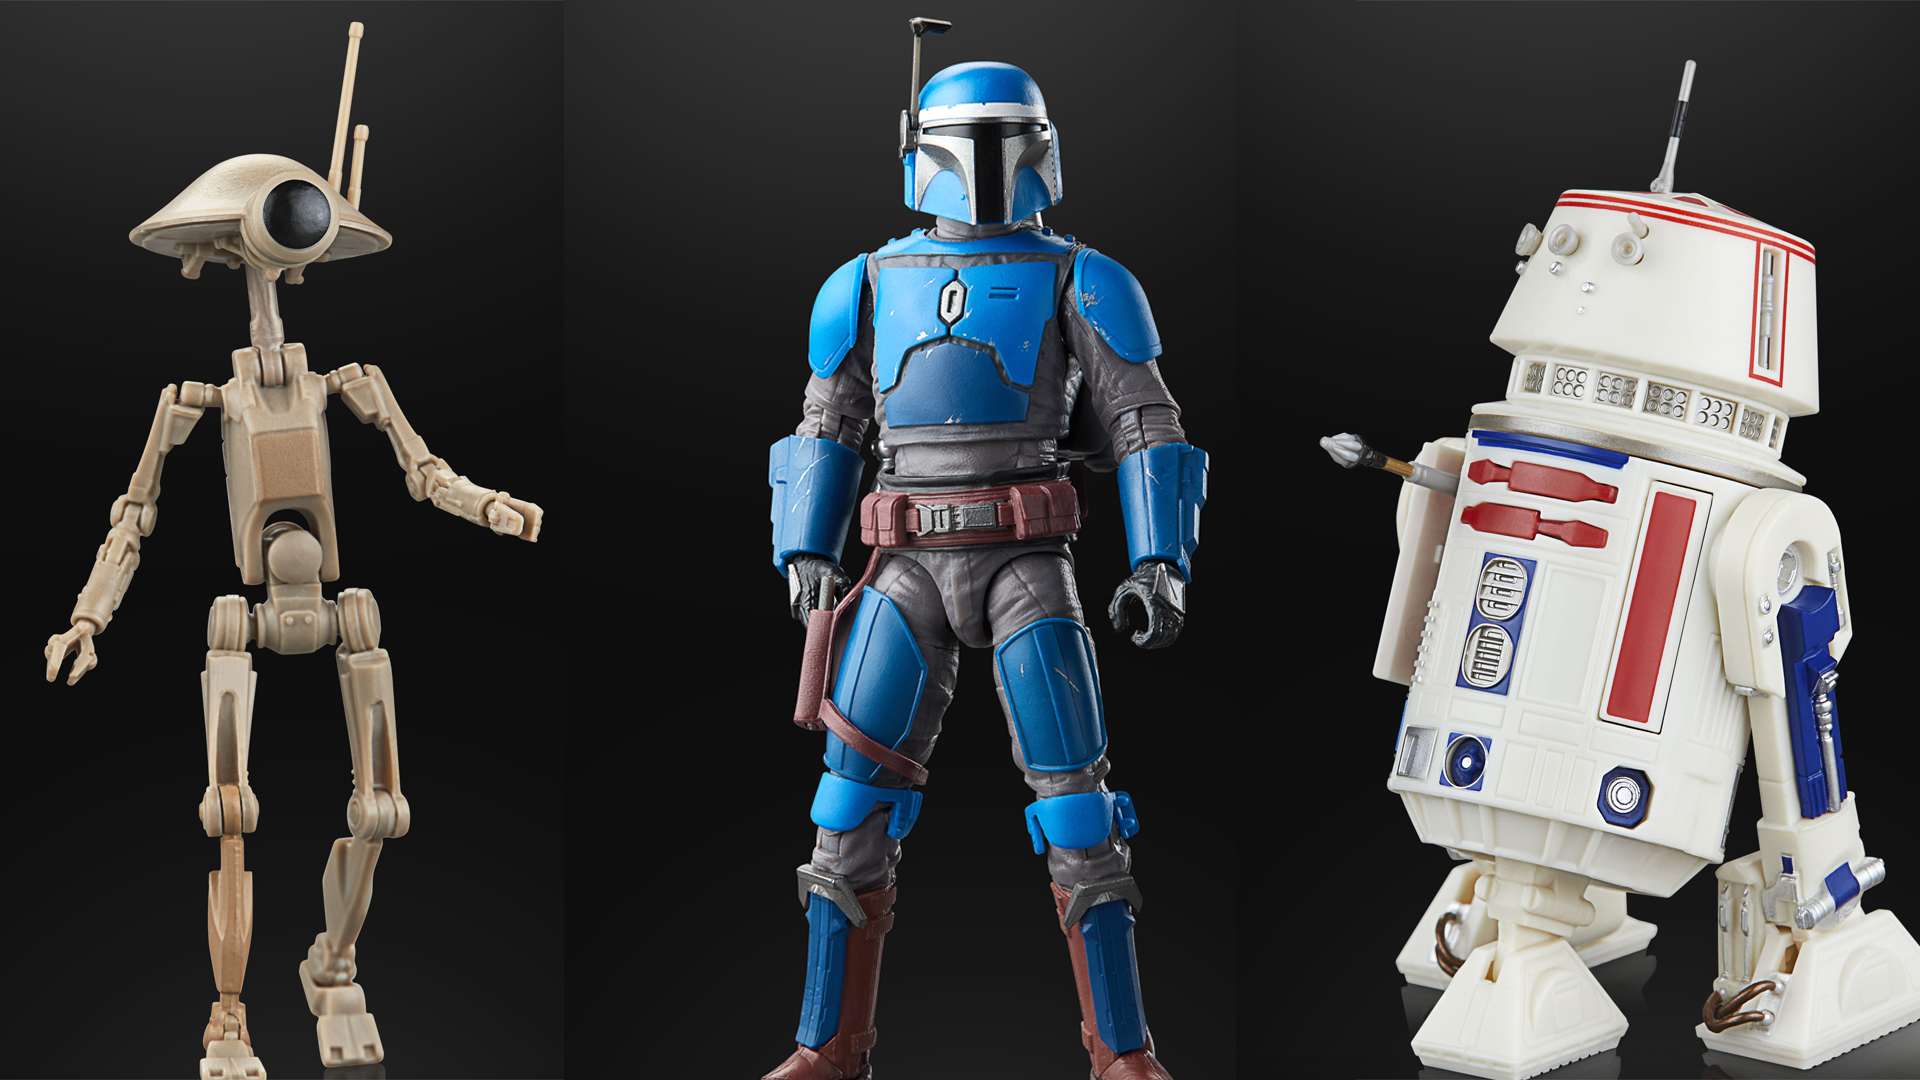 New Hasbro ‘The Mandalorian’ Season 3 Figures Include A Four-Droid Pack and New Mandalorian Privateer